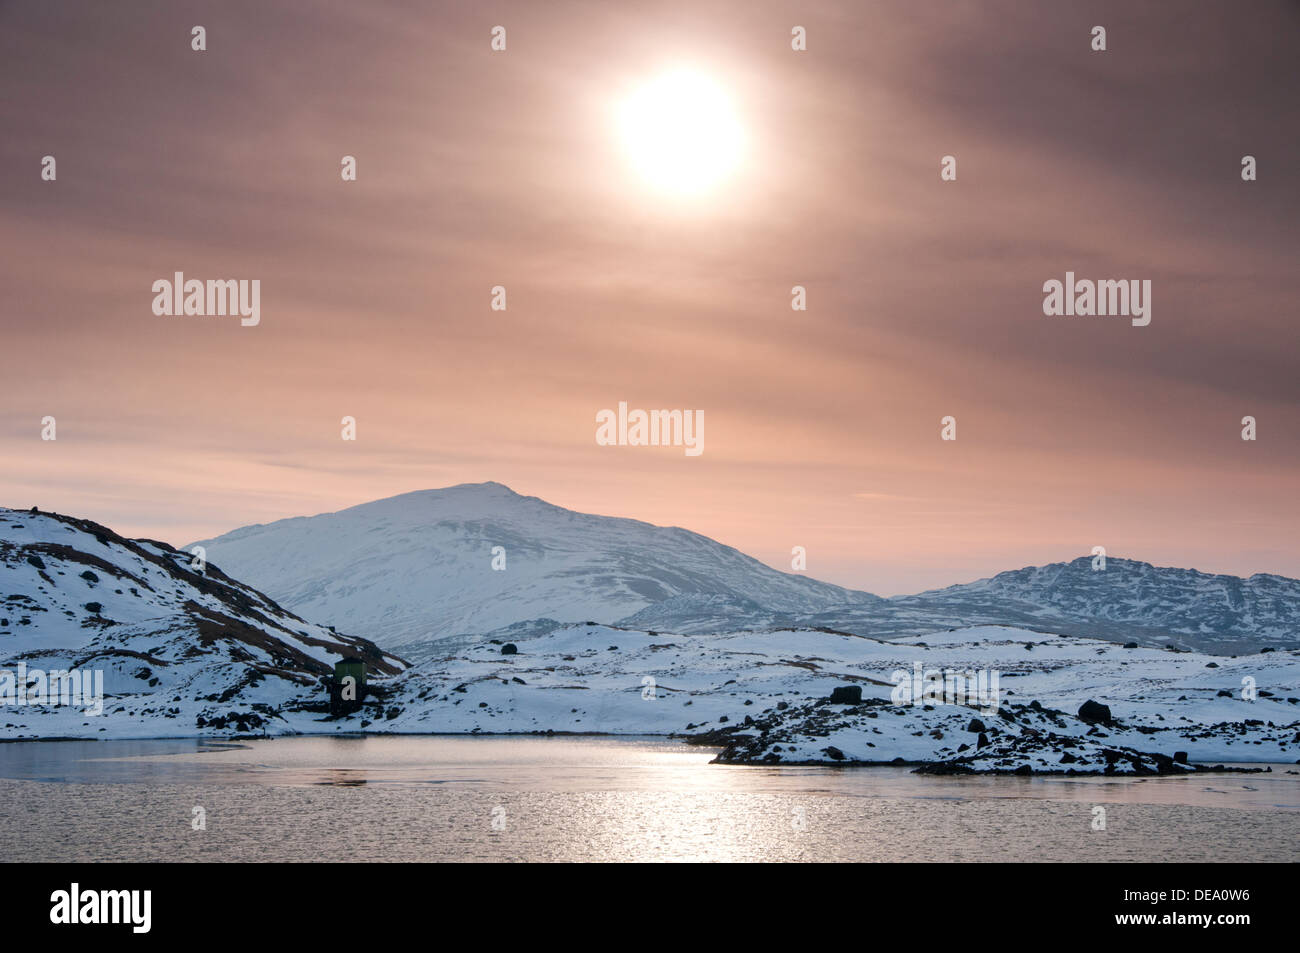 Moel Siabod & The Carneddau Mountains at Sunrise in Winter, Over Llyn Llydaw, Snowdonia National Park, North Wales, UK Stock Photo